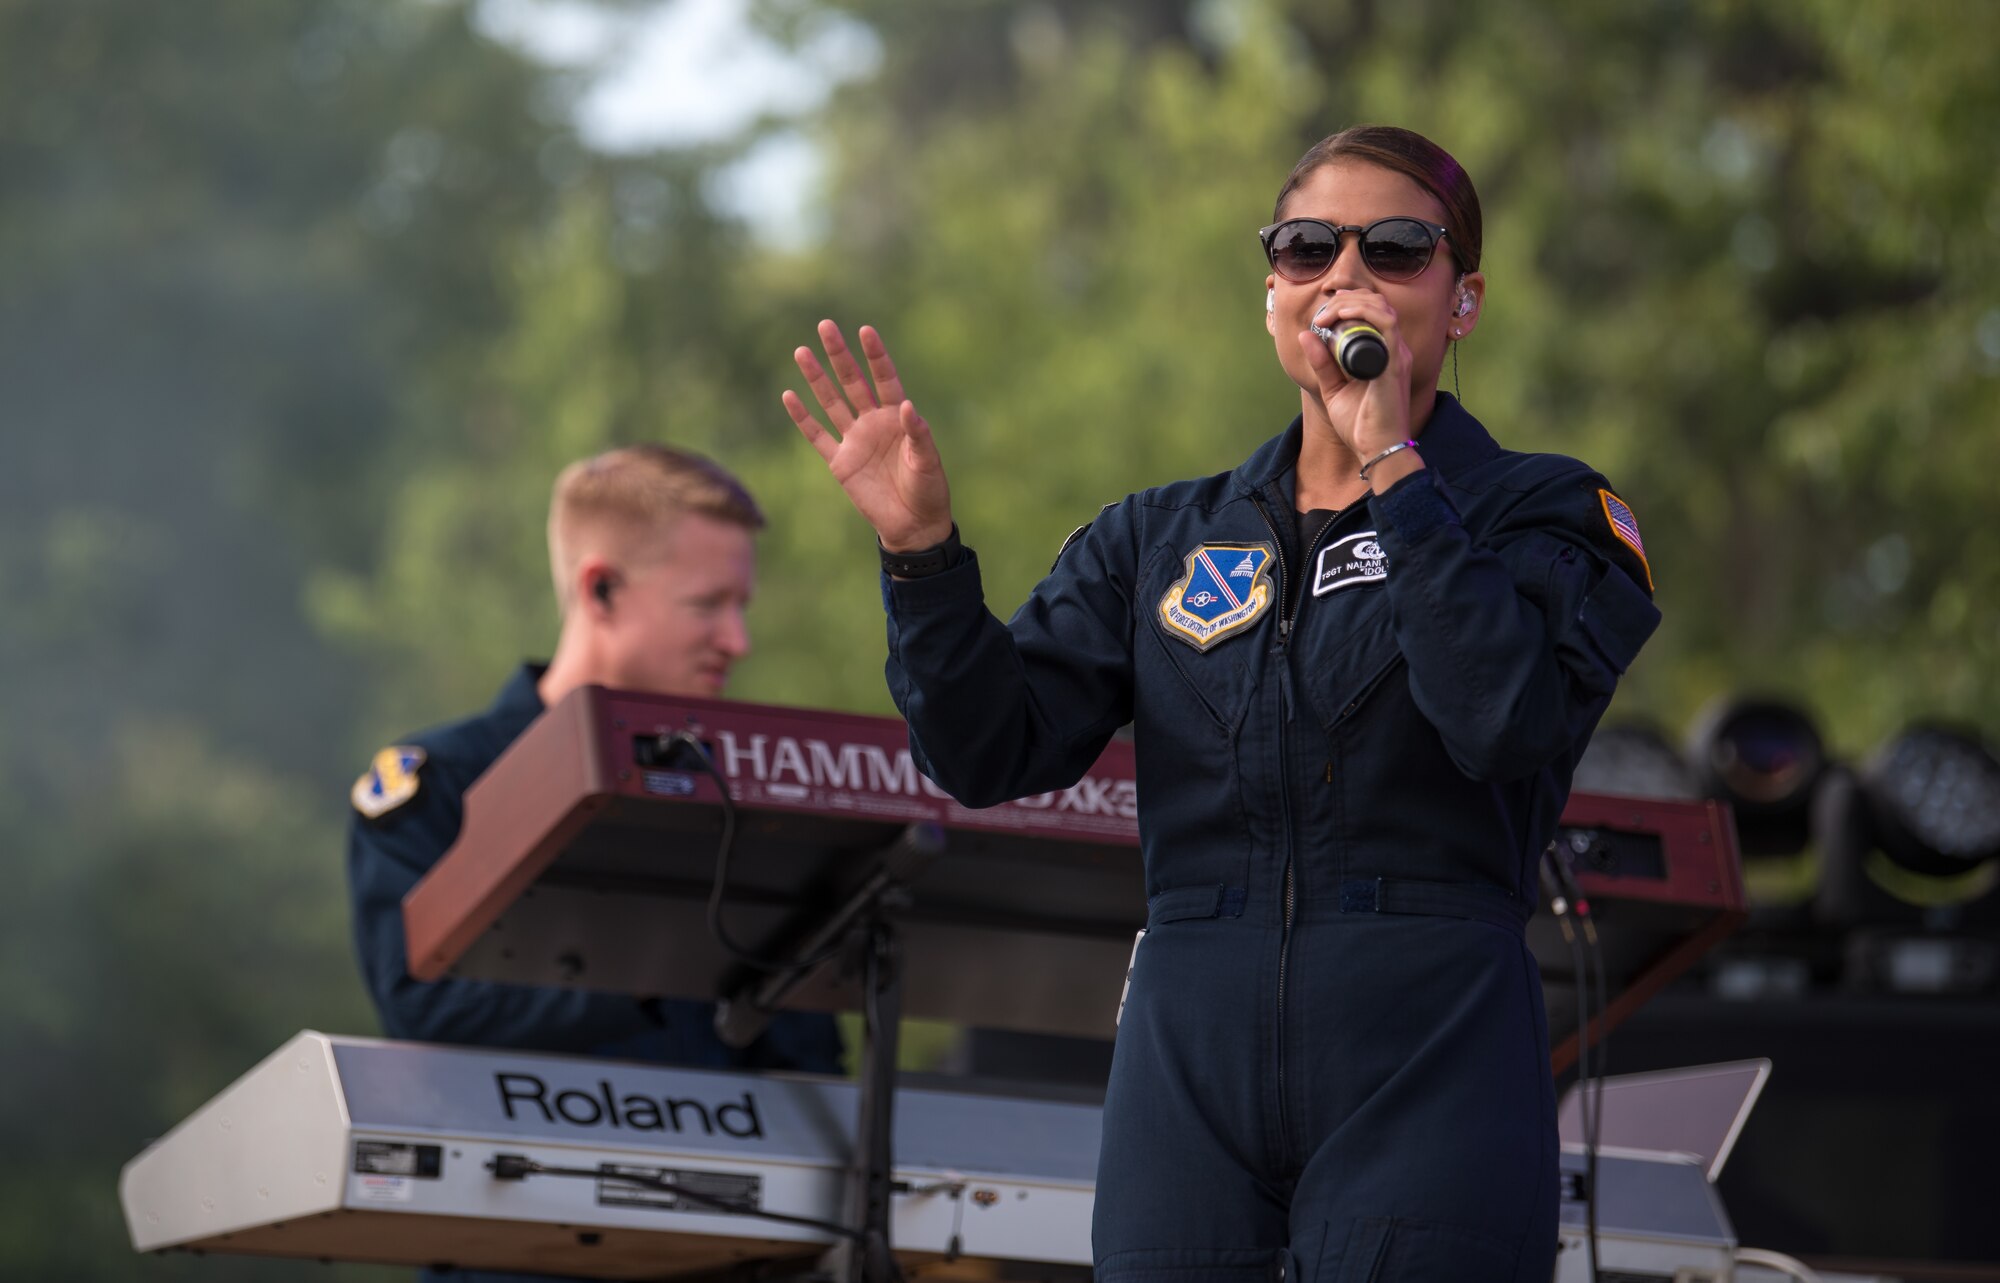 Lead vocalist for Max Impact, Technical Sgt. Nalani Quintello, performs at the Armed Forces Tribute during the 2019 Suwannee River Jam. This event took place at the Spirit of the Suwannee Music Park on Saturday, May 4, 2019. (U.S. Air Force Photo by Chief Master Sgt. Kevin Burns)